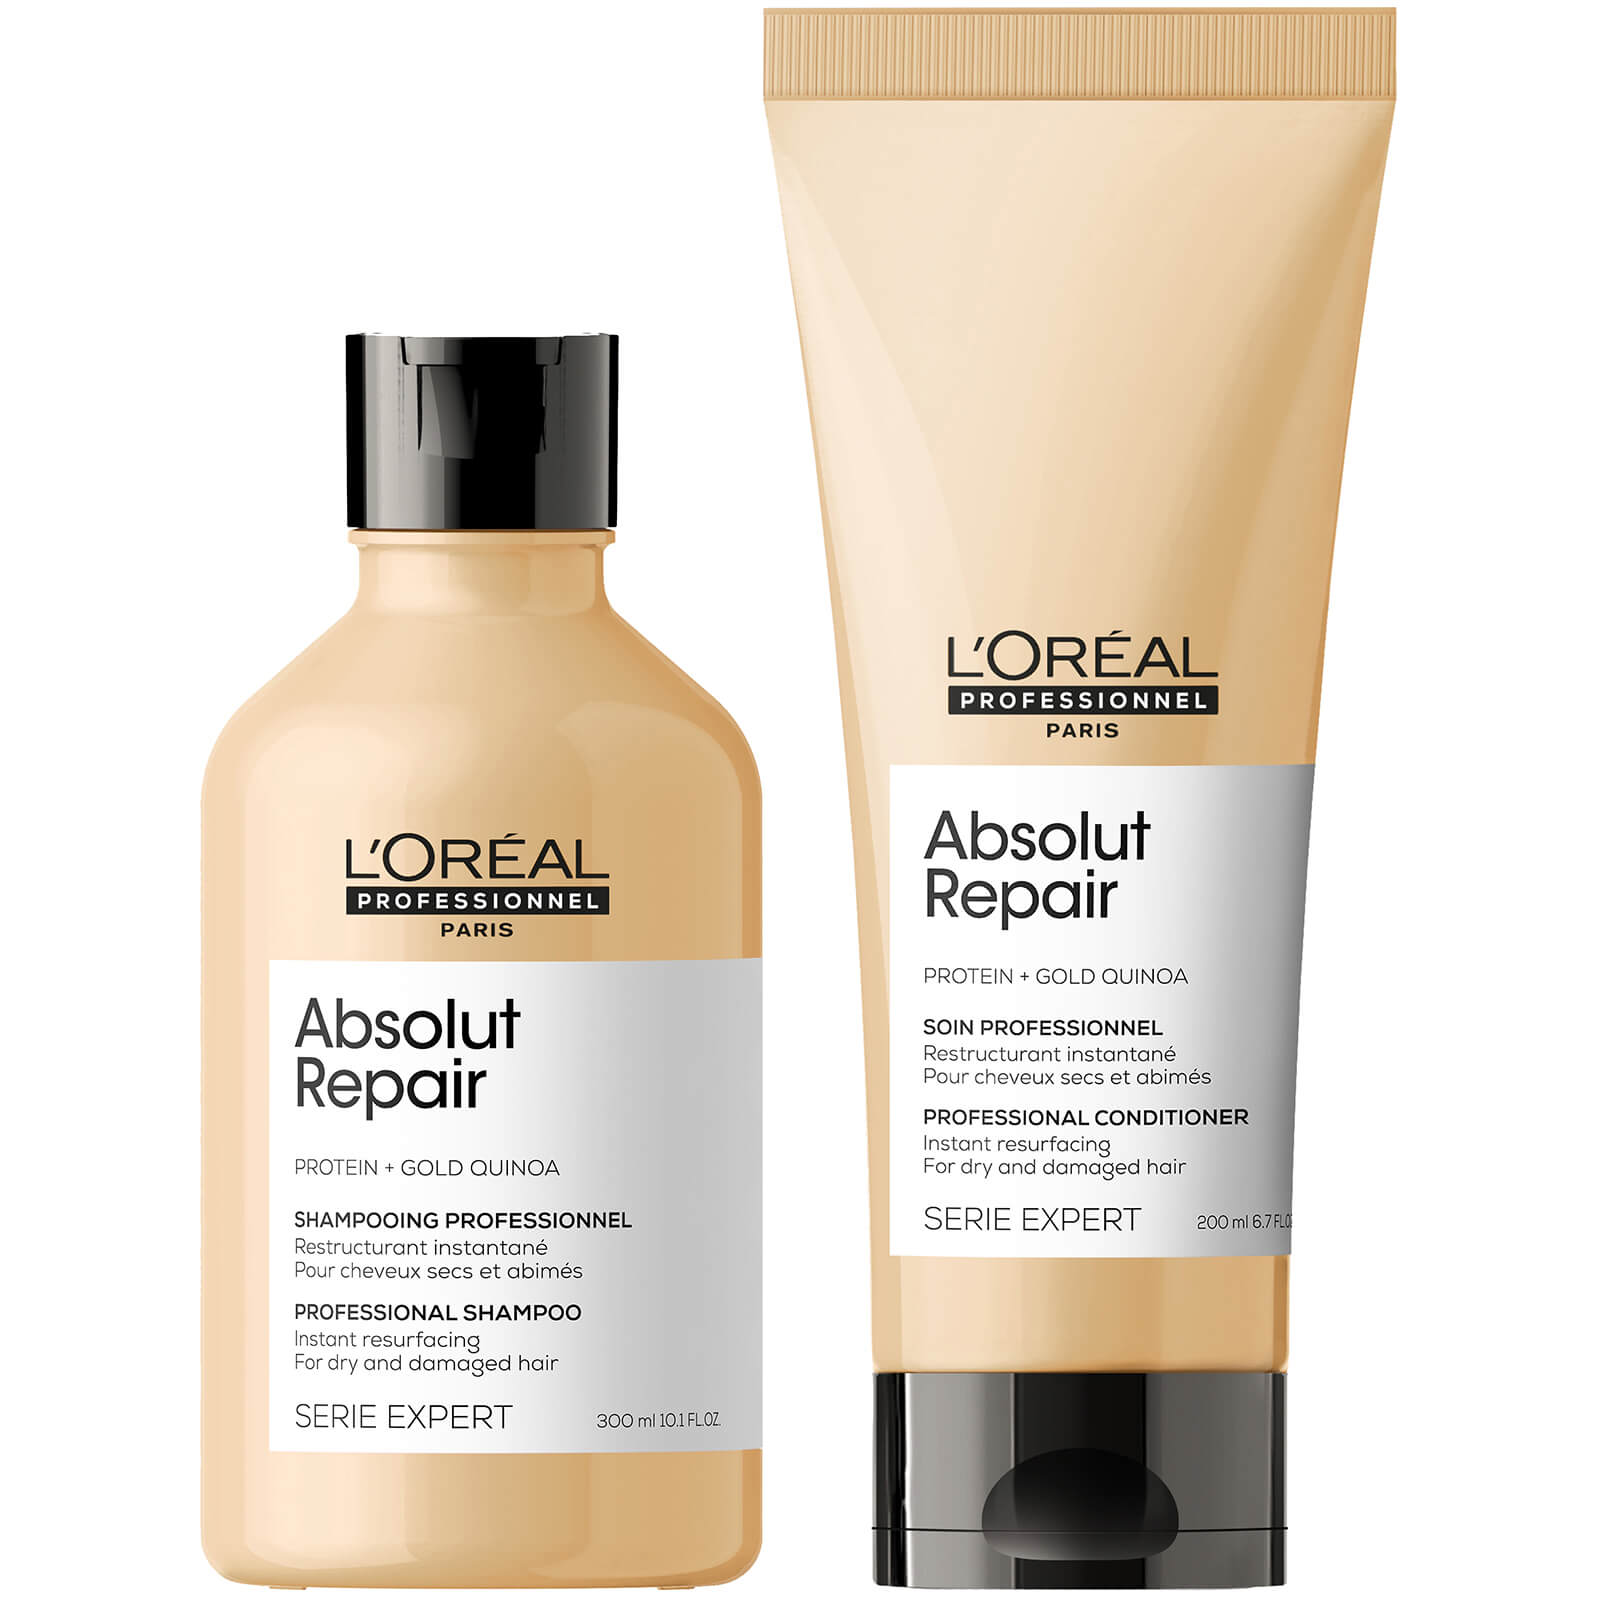 L'oreal Professionnel Absolut Repair Shampoo And Conditioner Duo